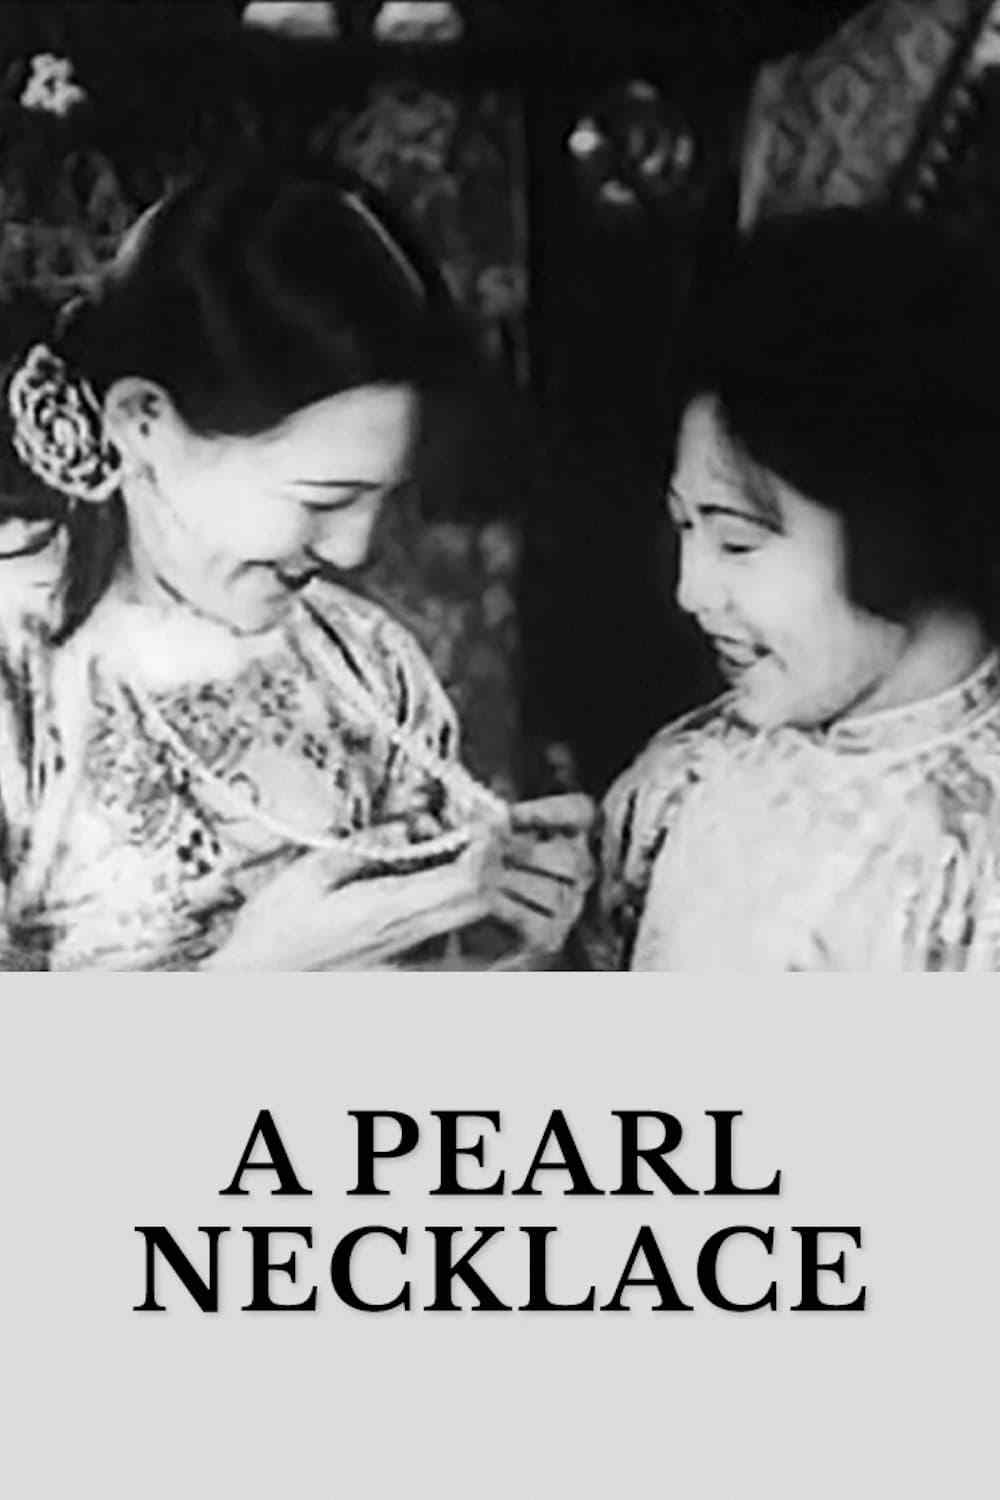 A pearl necklace 一串珍珠 [Silent Movie]